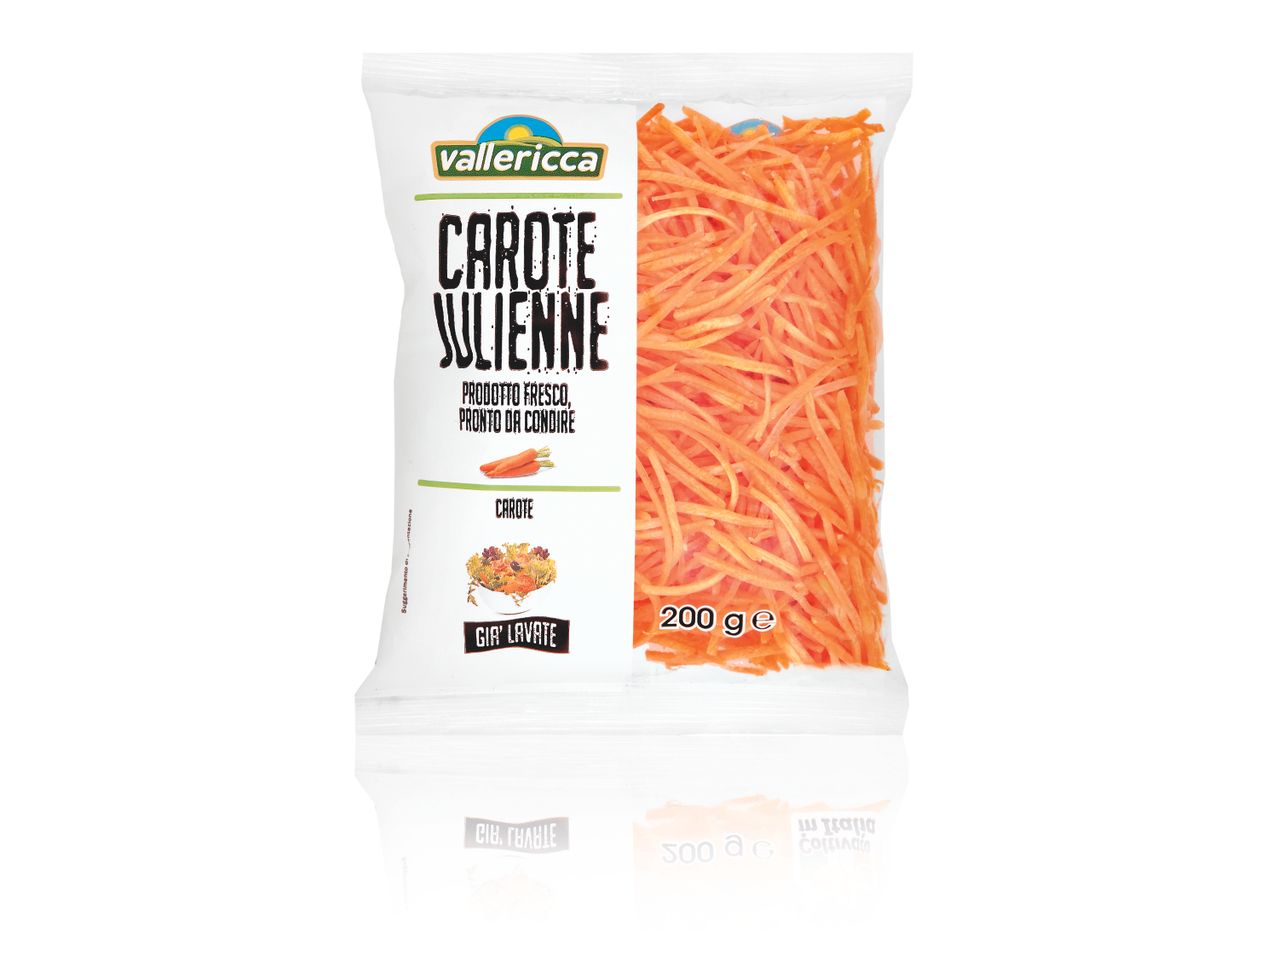 Go to full screen view: Julienne Carrots - Image 1